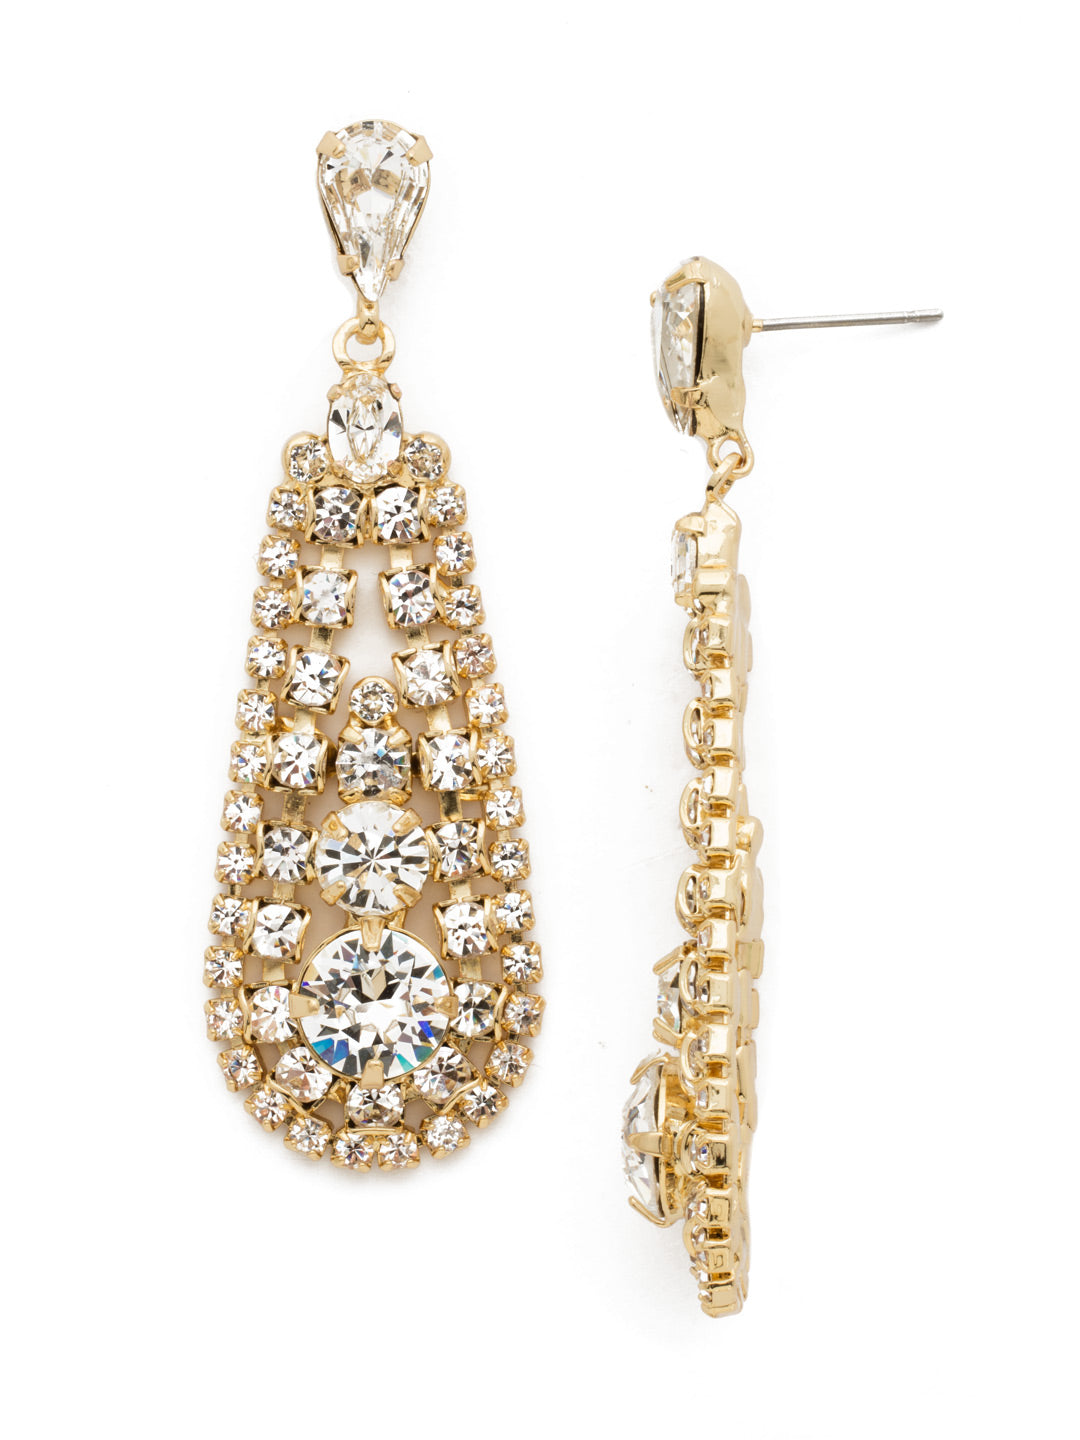 In the Loop Earring - EDP6BGCRY - A surefire stunner, this earring features rows of stacked round cut crystals looping in a central pattern of brilliant cut stones.